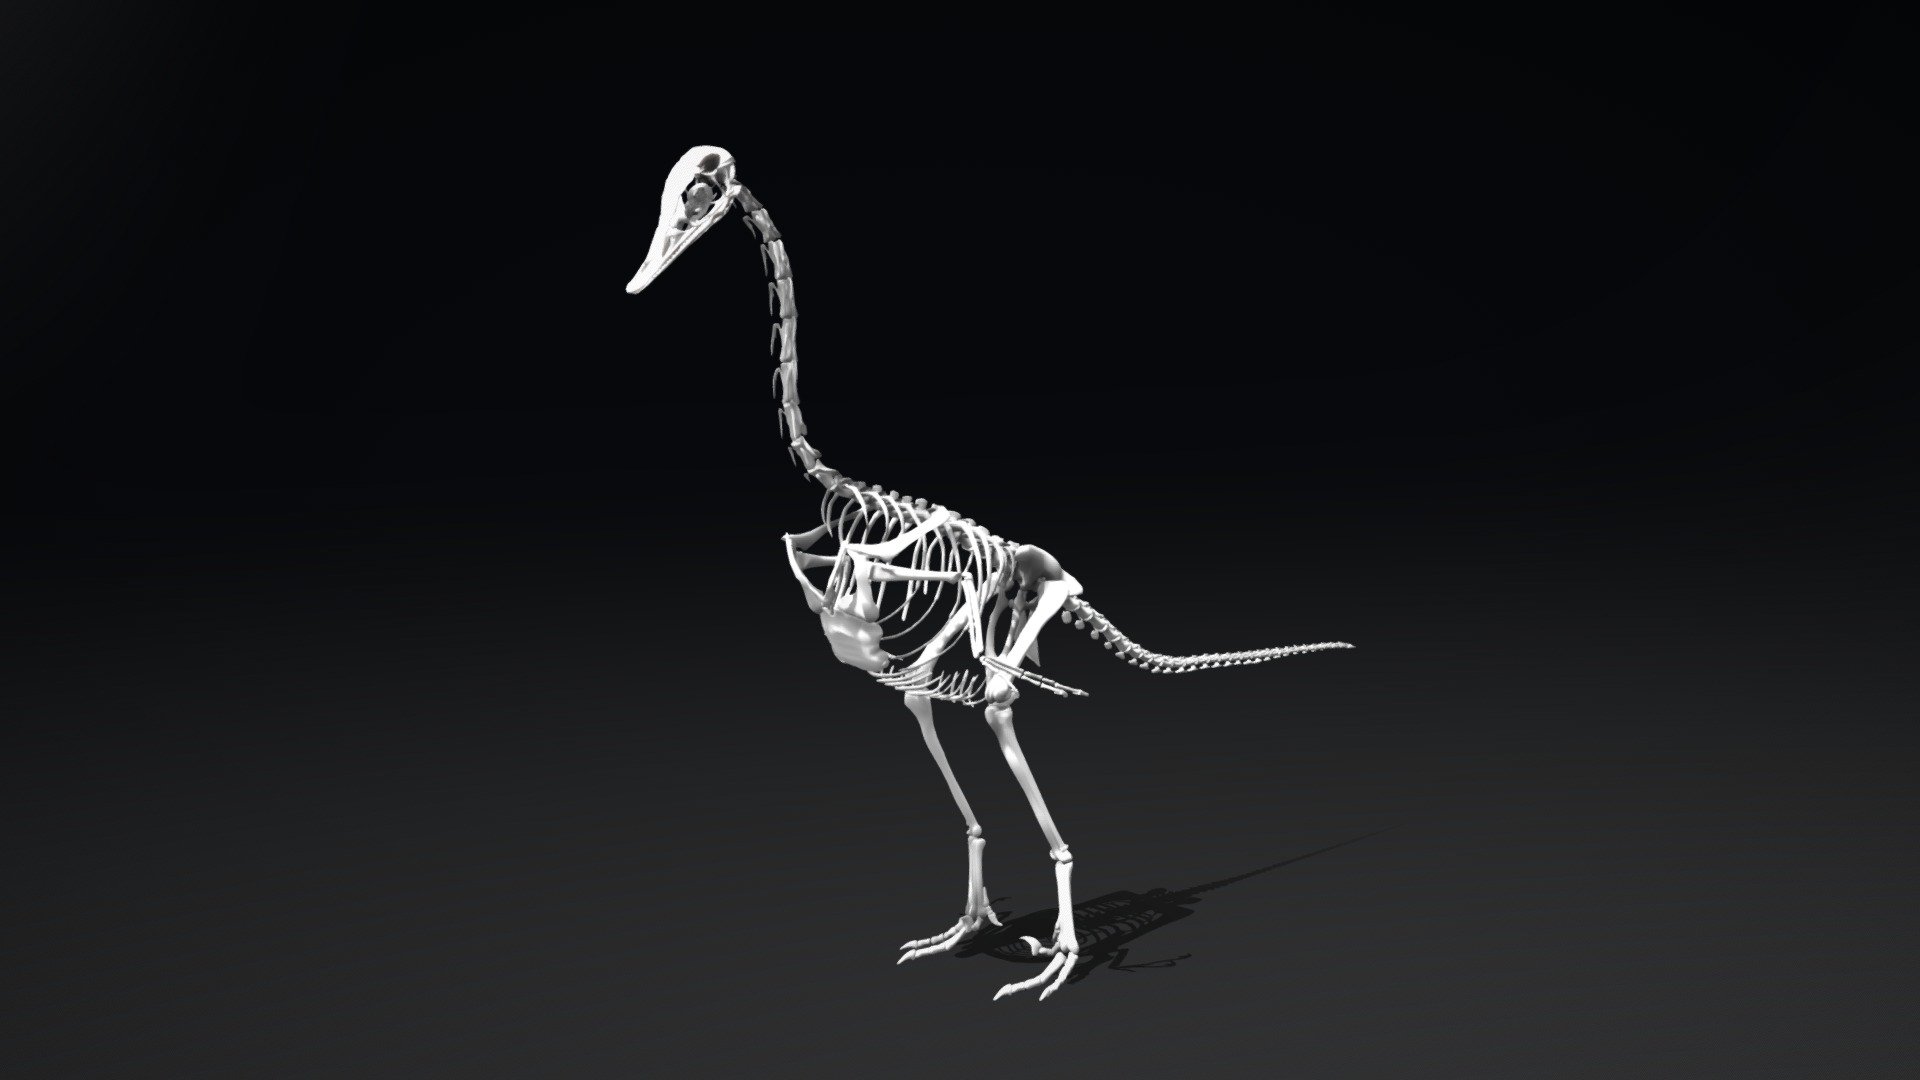 Halszkaraptor escuilliei  (Cau et al., 2017)

Based on the skeletal drawing by Marco Auditore - Halszkaraptor escuilliei Skeleton - 3D model by Iofry 3d model